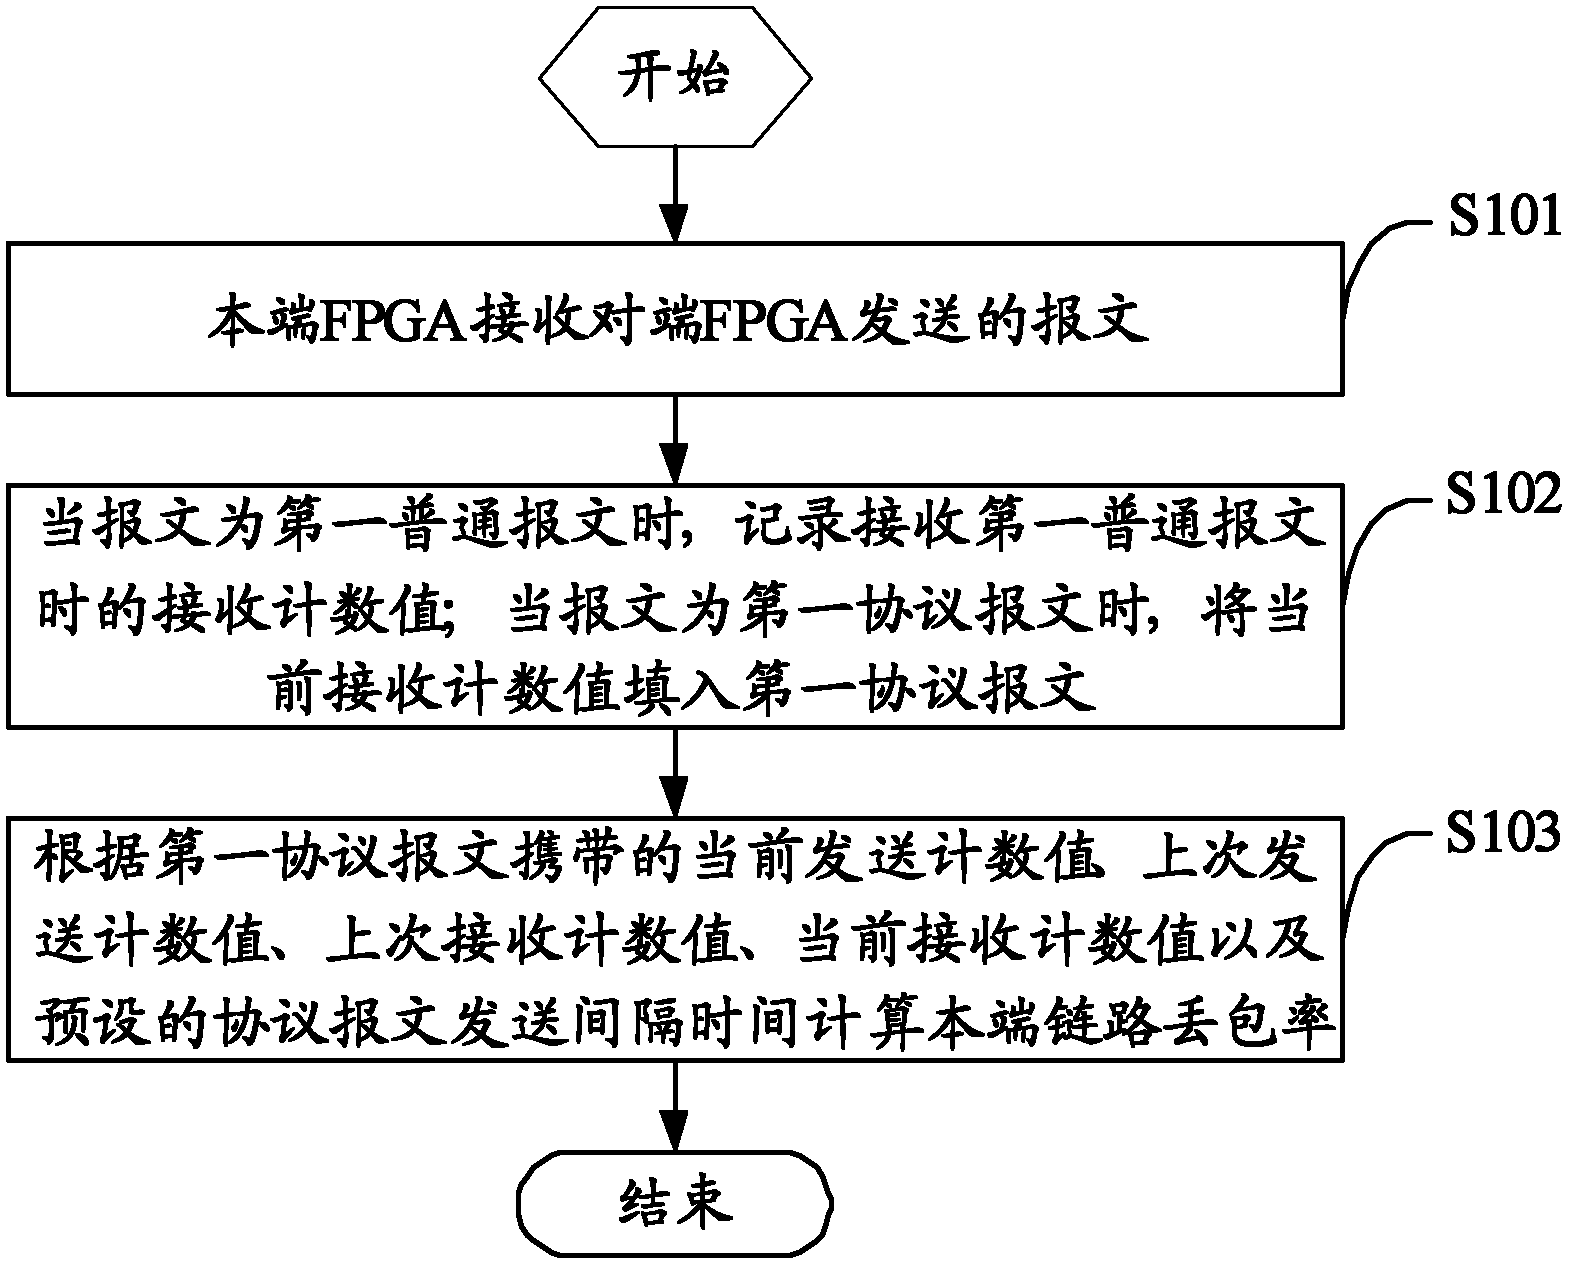 Method and device for monitoring packet loss rate based on an FPGA (Field Programmable Gate Array)